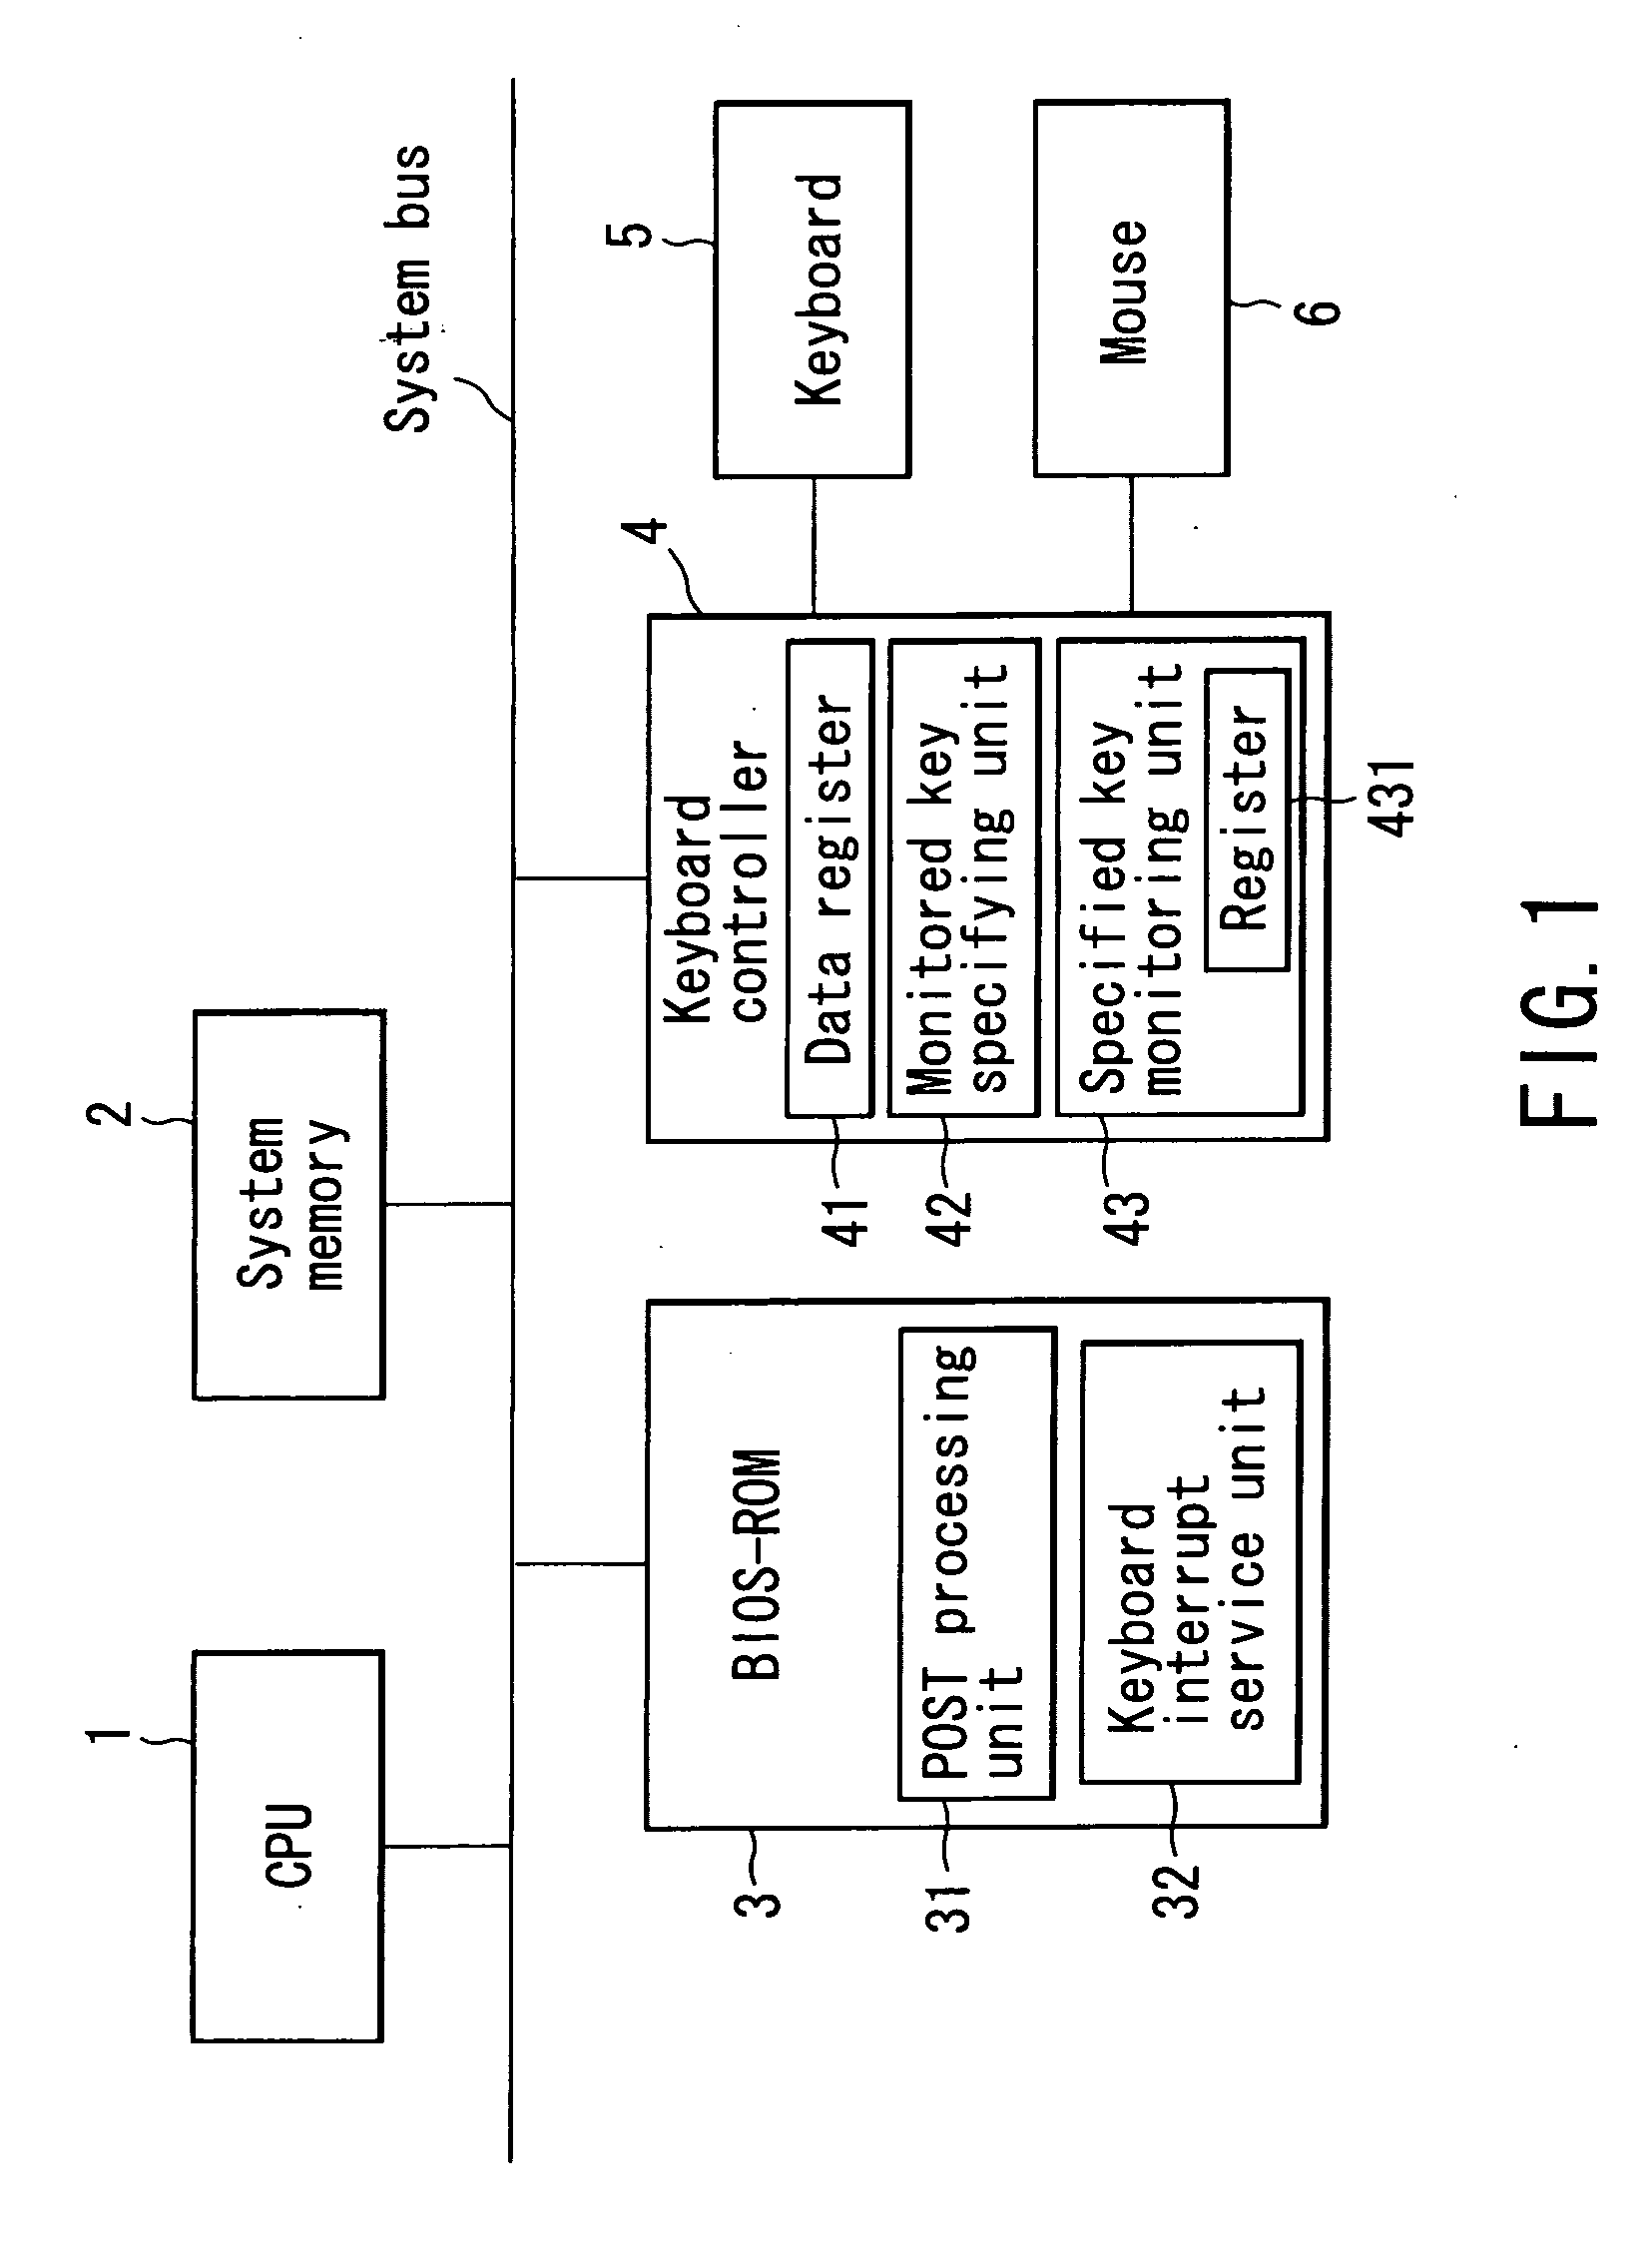 Information processing apparatus, keyboard controller, and method of key input determination